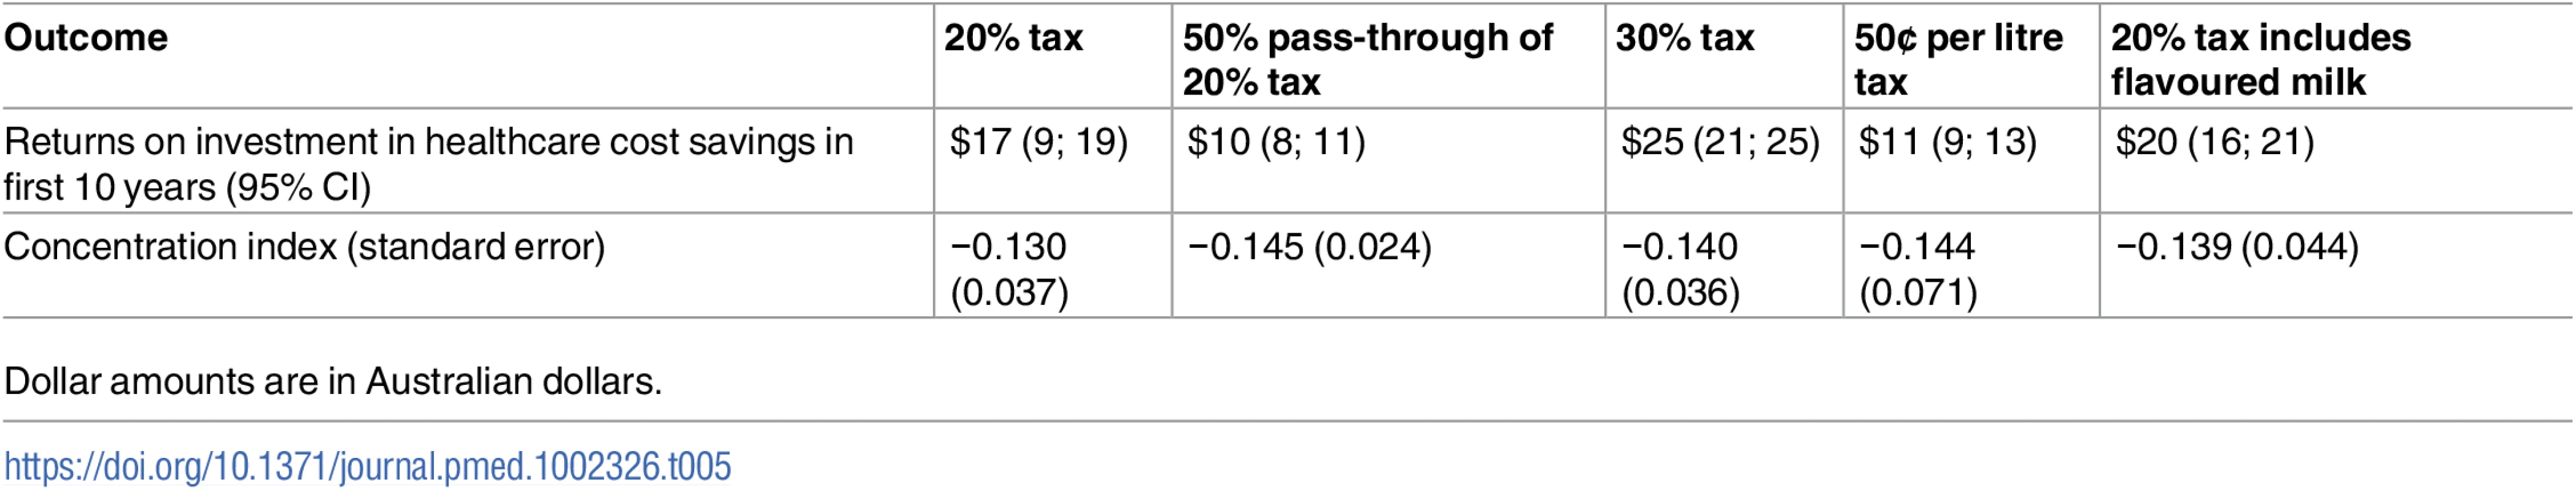 Returns on investment in healthcare cost savings and concentration indices of tax scenarios.